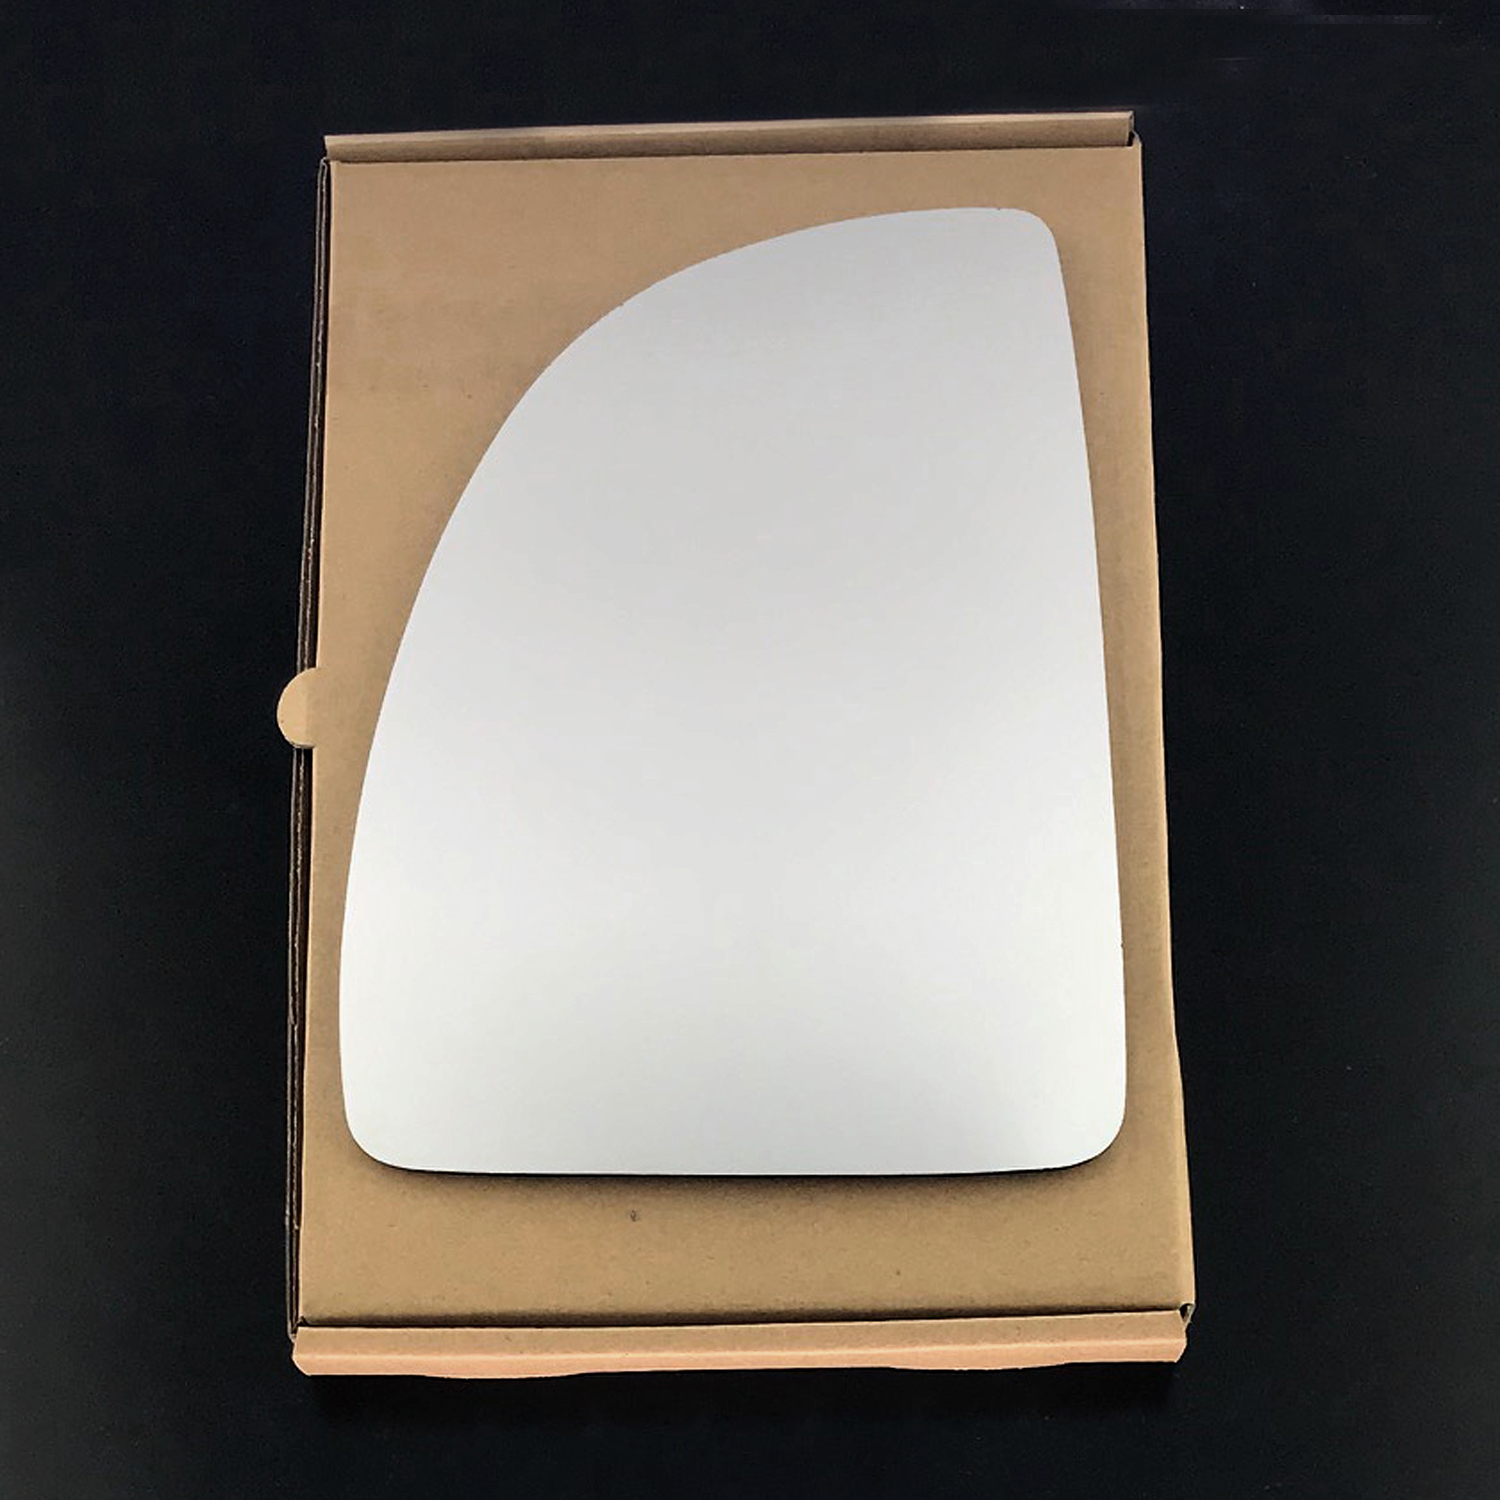 Peugeot Boxer Wing Mirror Glass LEFT HAND ( UK Passenger Side ) 1999 to 2005 – Convex Wing Mirror